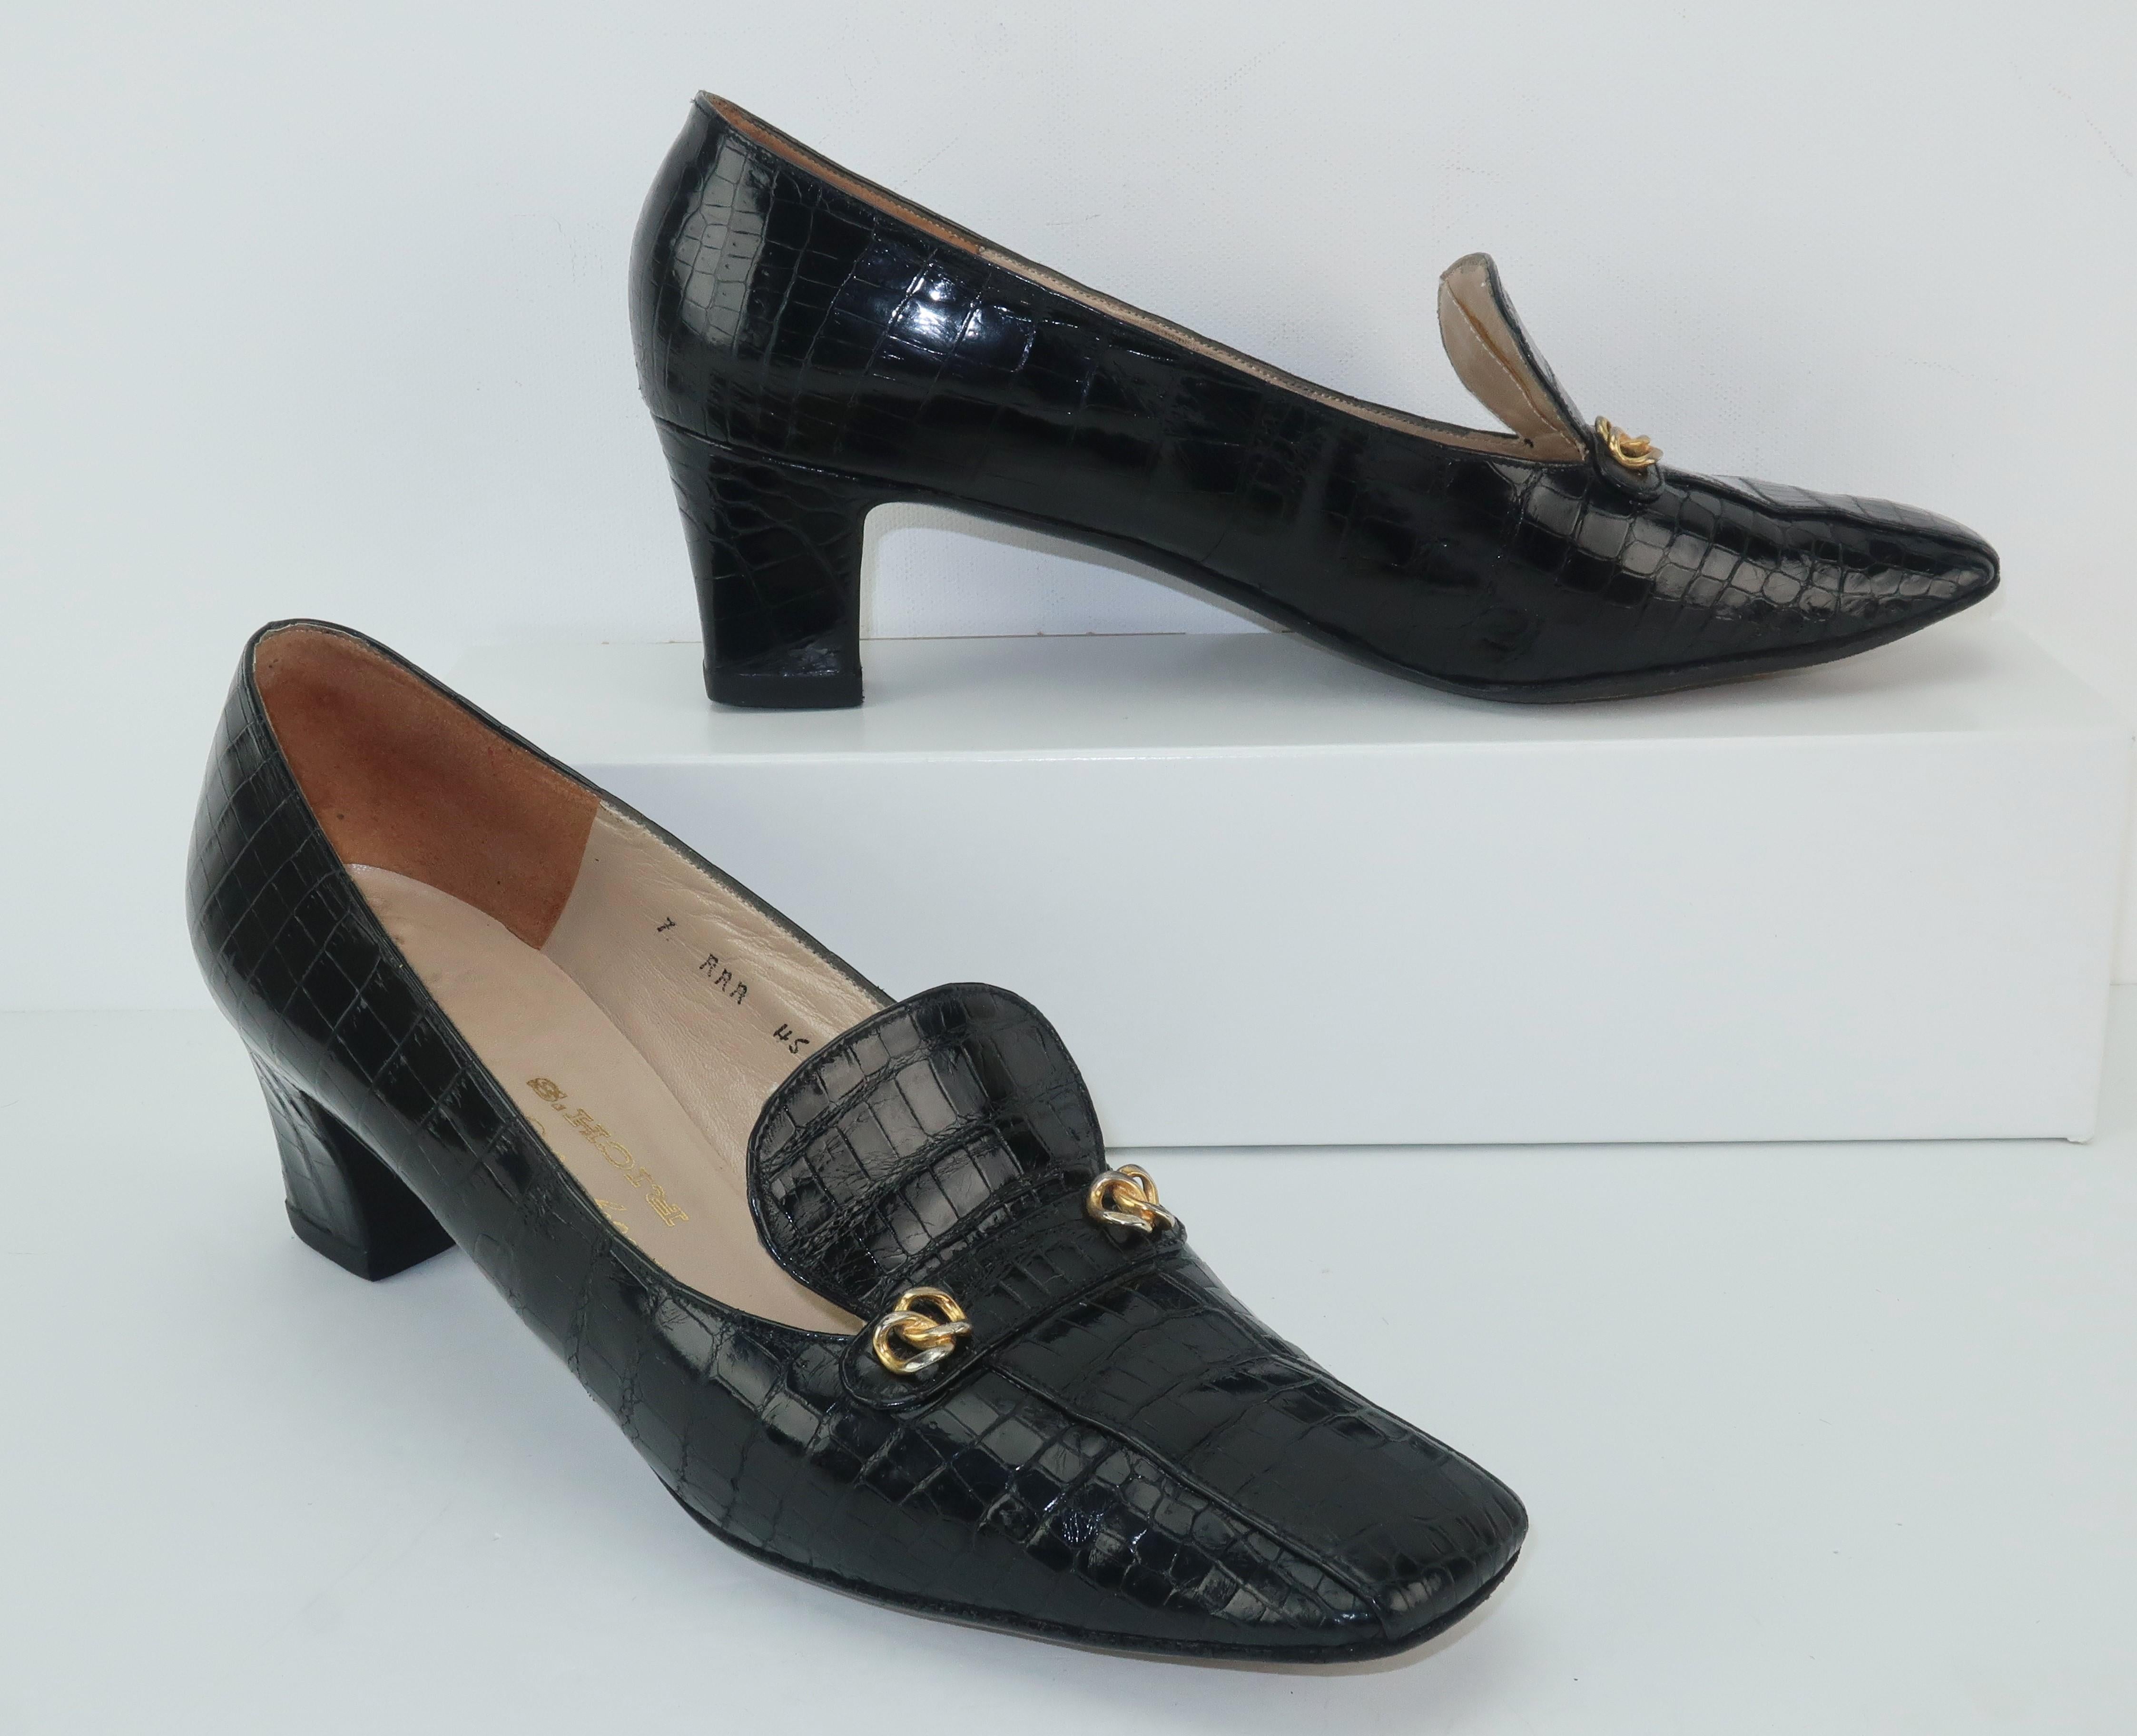 Stylish sensibility!  These Charles Jourdan C.1960 black crocodile shoes are a classic heeled loafer with stylish details including gold tone metal embellishments and a stylized vamp.  The squared toe provides a casual look perfect for skirts and